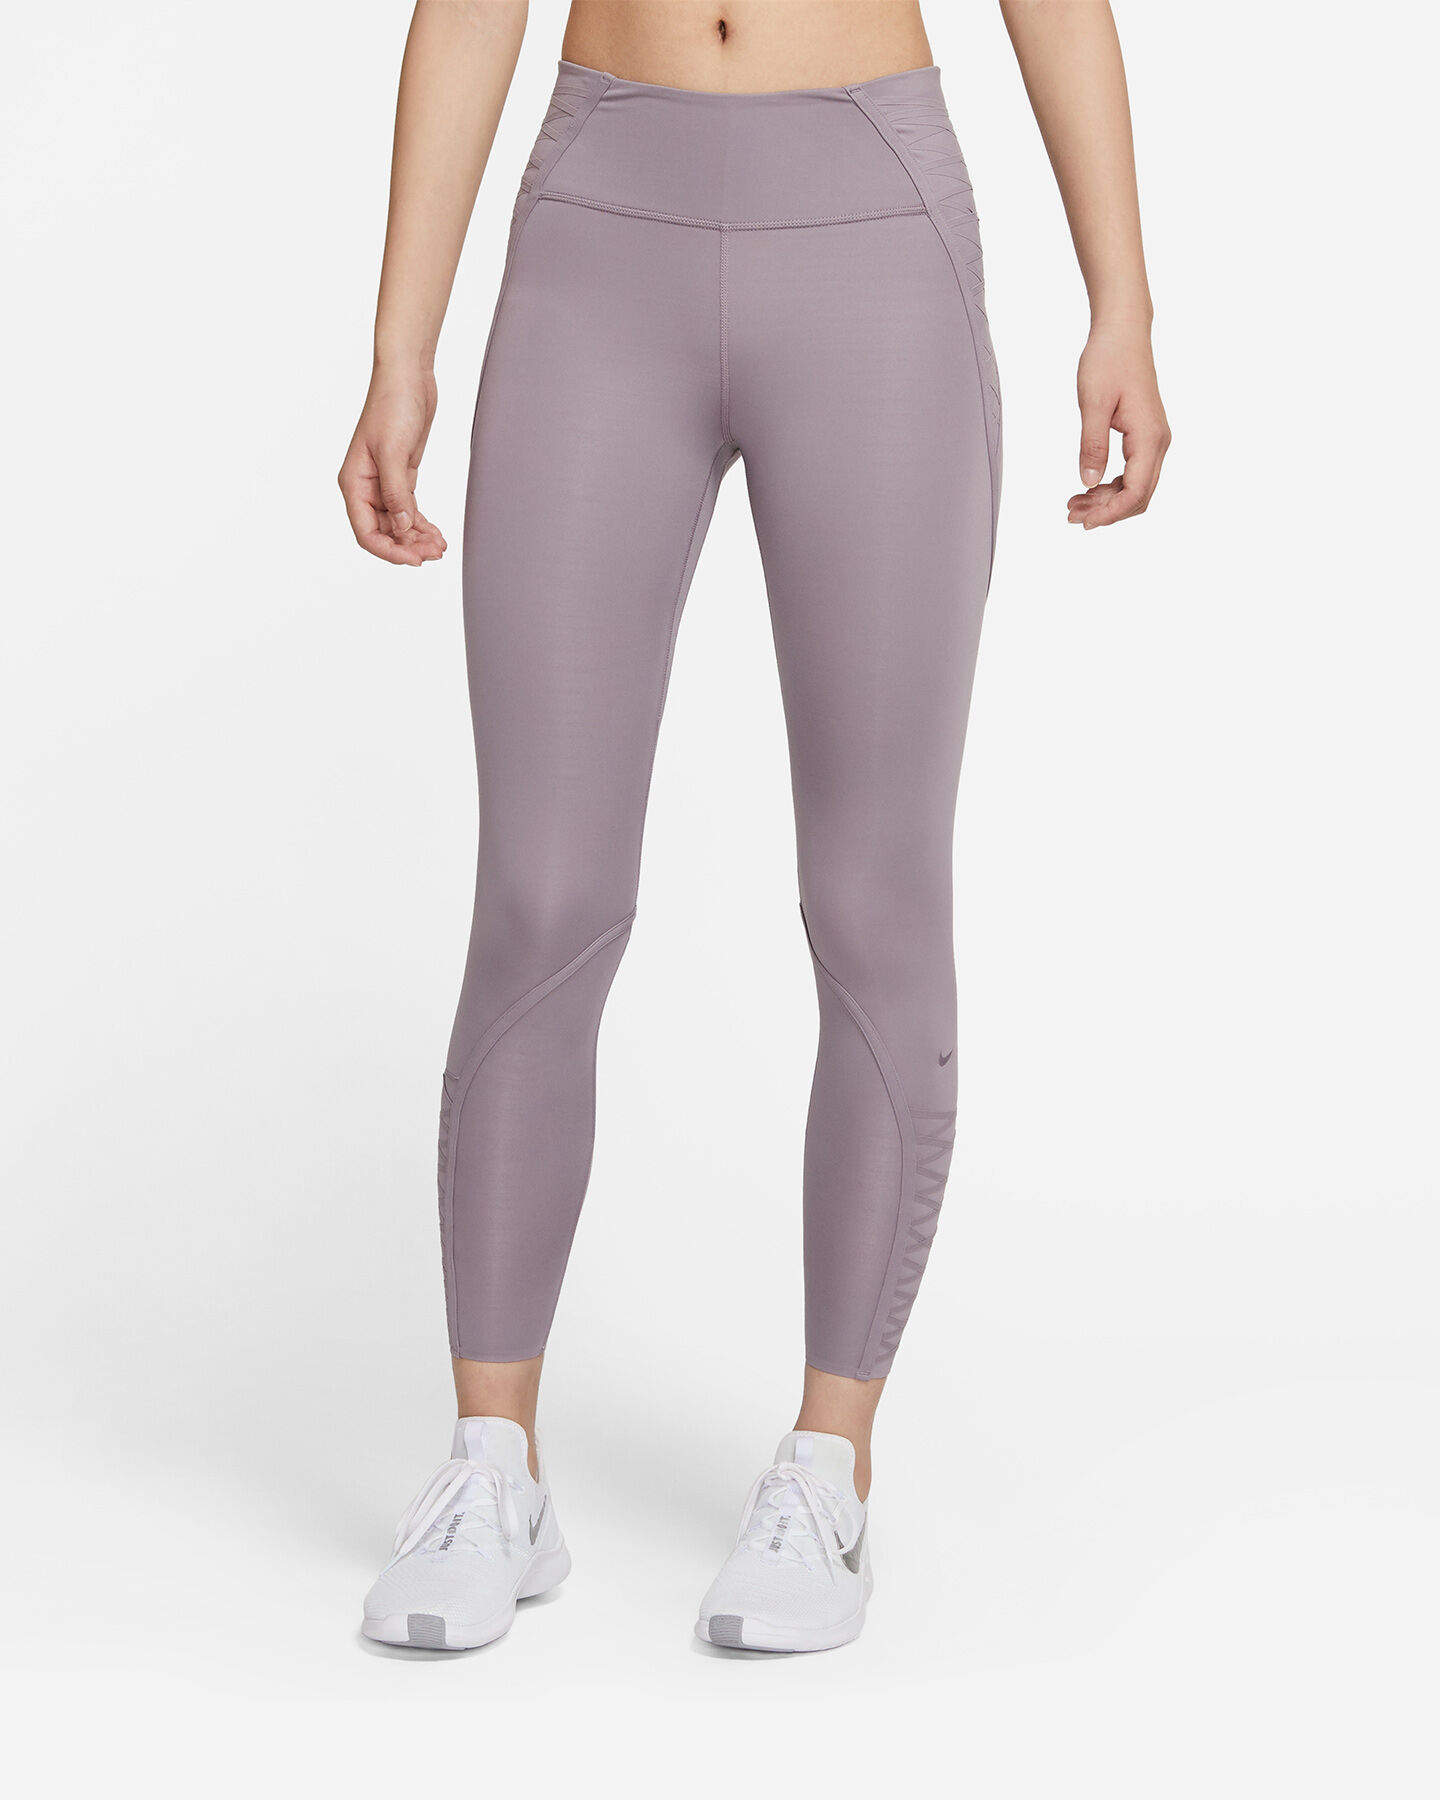  Leggings NIKE ONE LUX 7/8 W S5270517|531|XS scatto 0